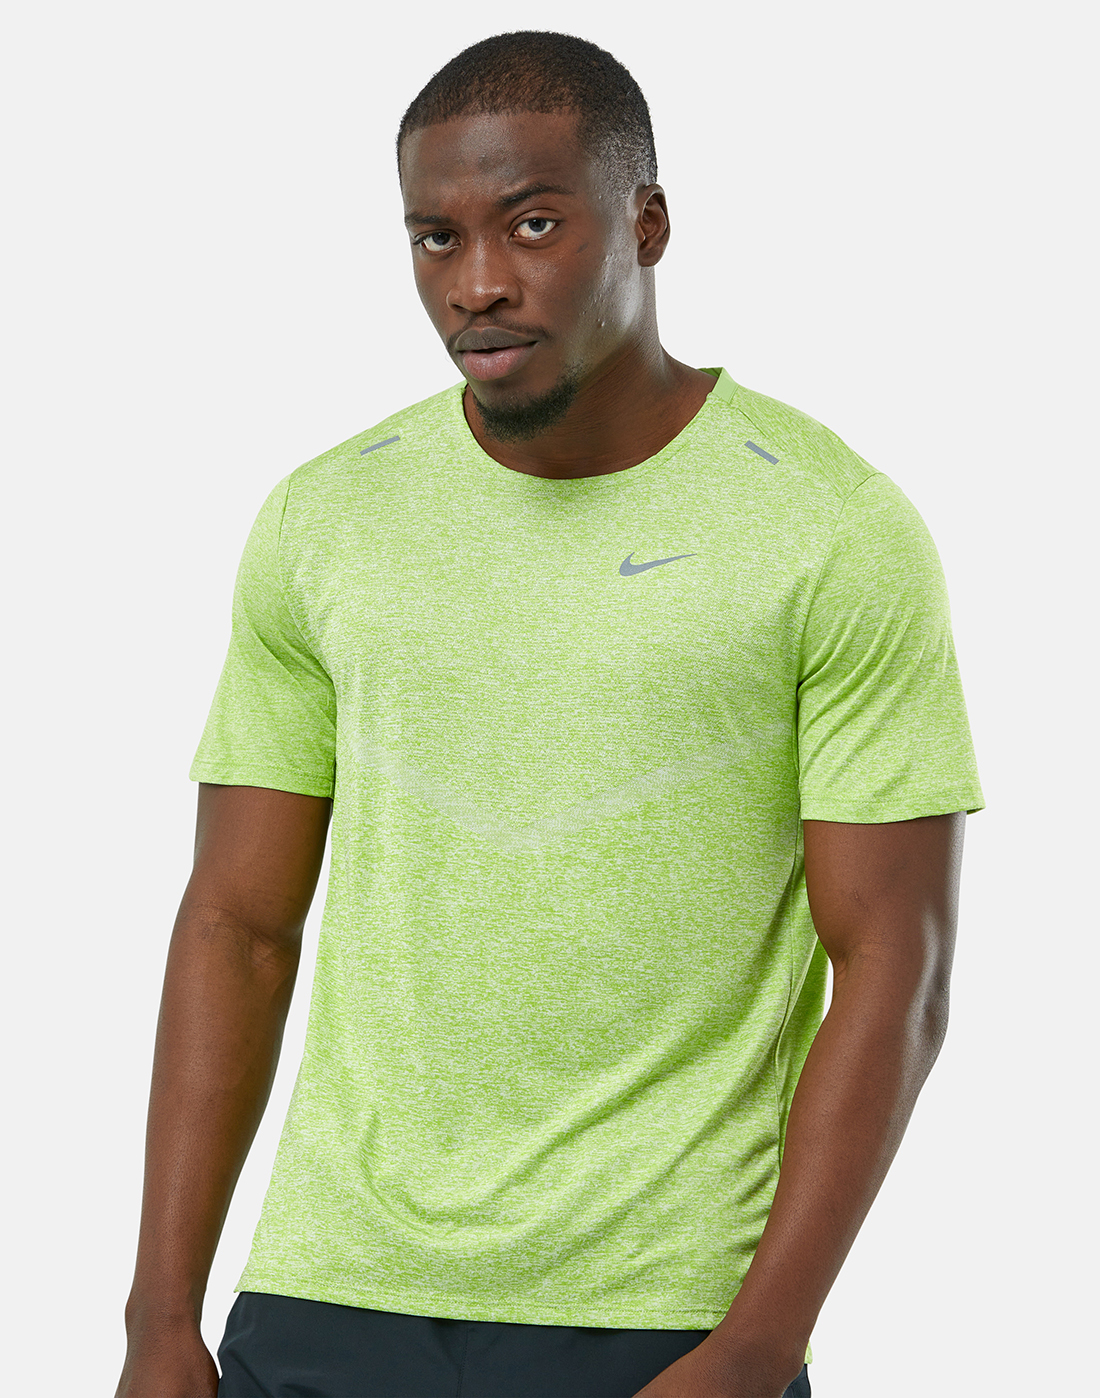 Nike Mens Rise 365 T-Shirt - Green | Life Style Sports IE